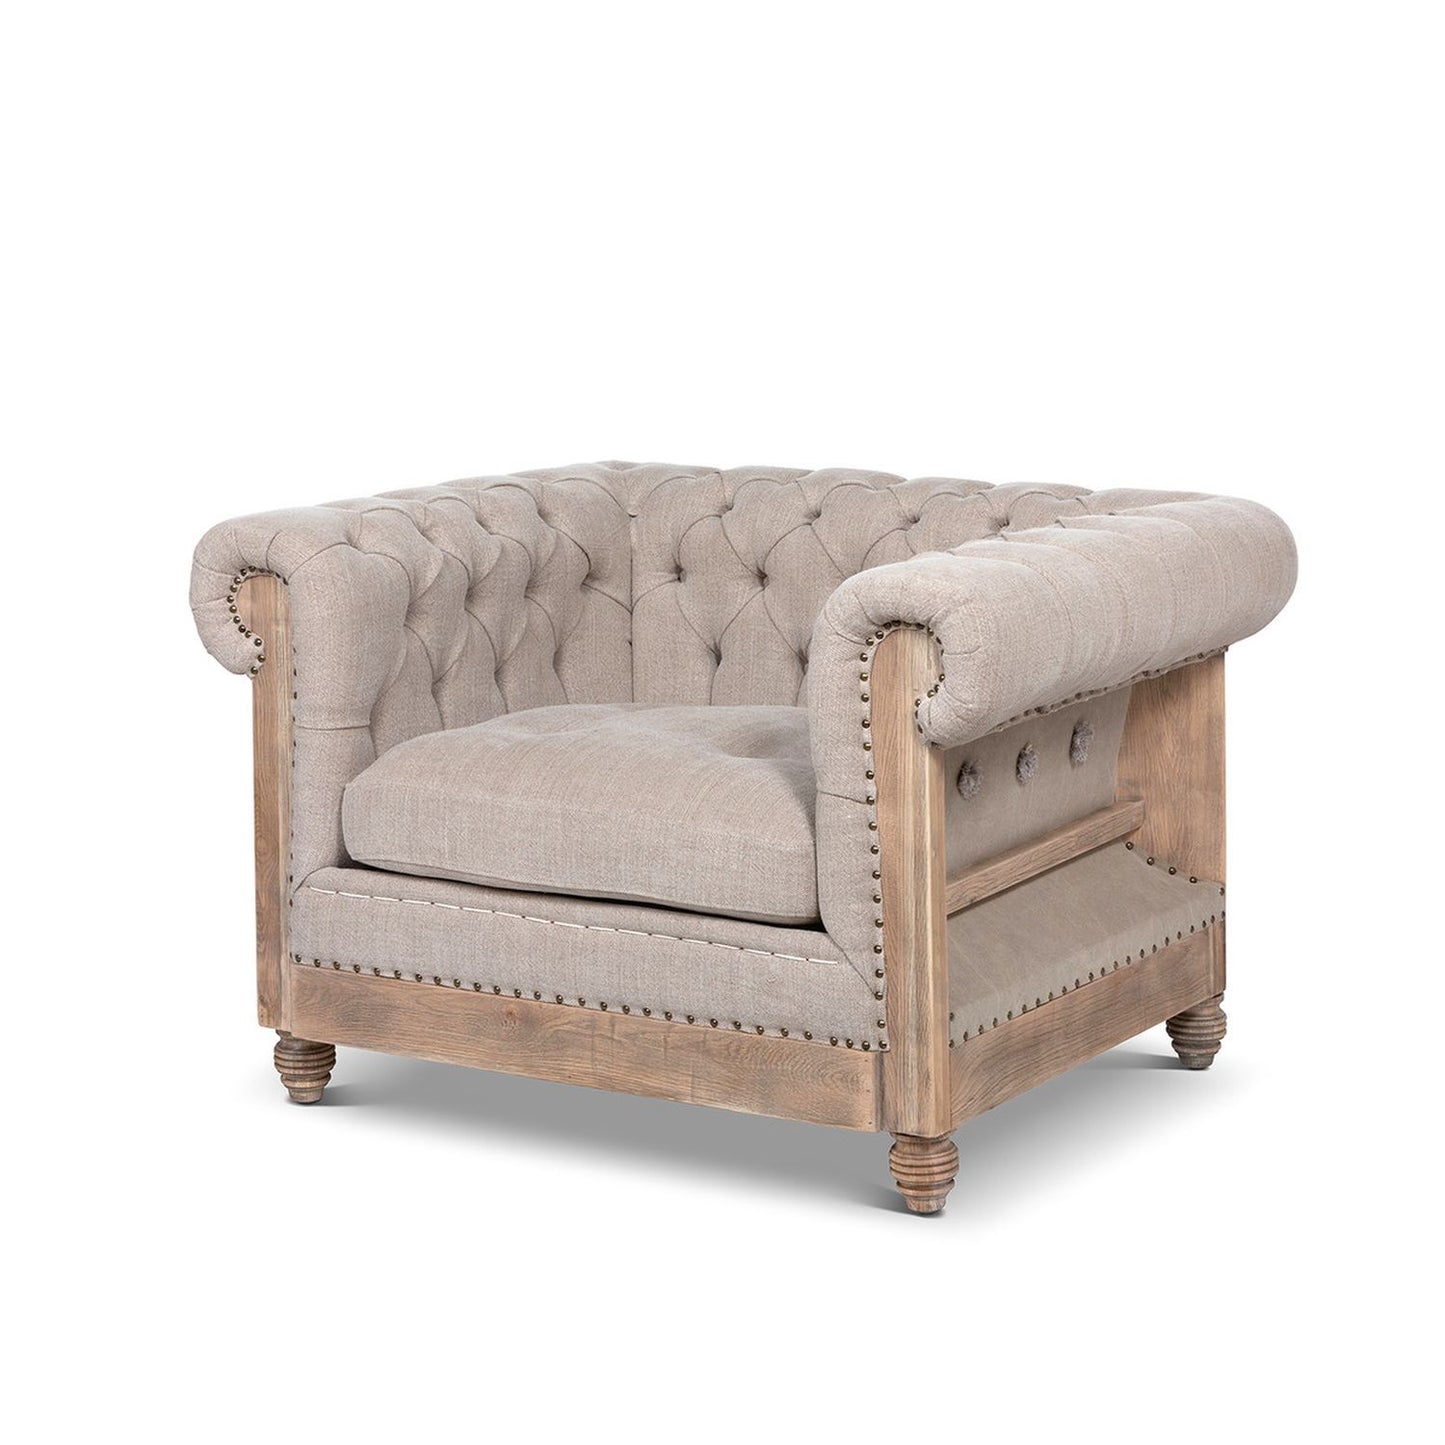 Park Hill Collection Hillcrest Tufted Chair